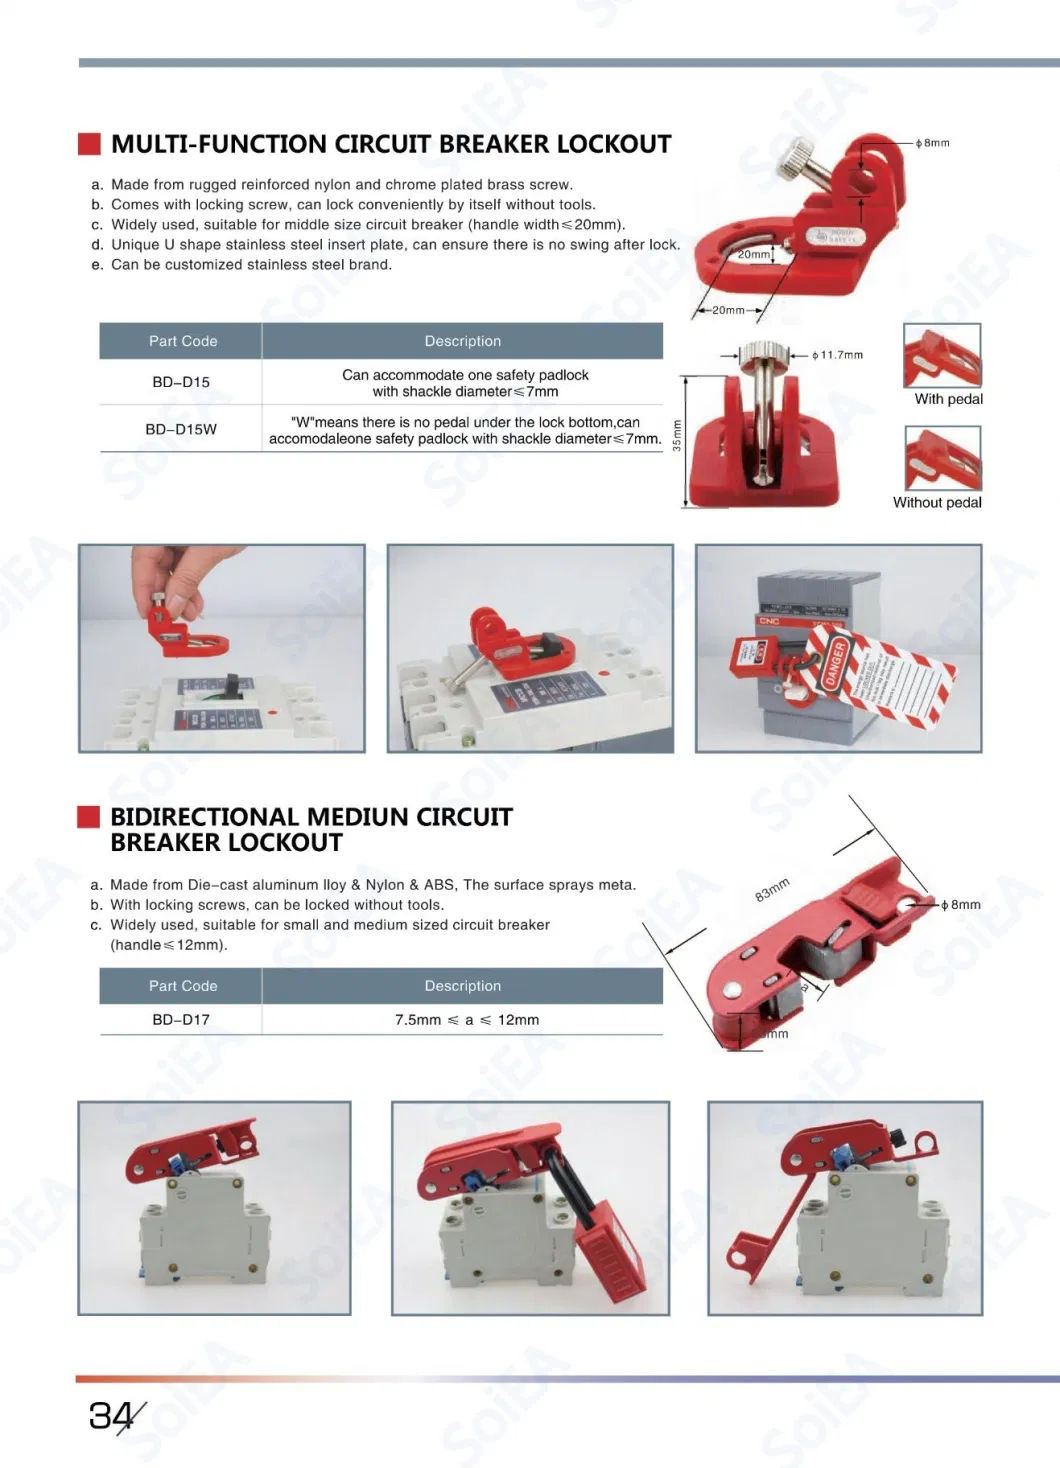 Electric Moulded Case Circuit Breaker Lockout Locks, MCB Circuit Breaker Lockout Tagout Devices